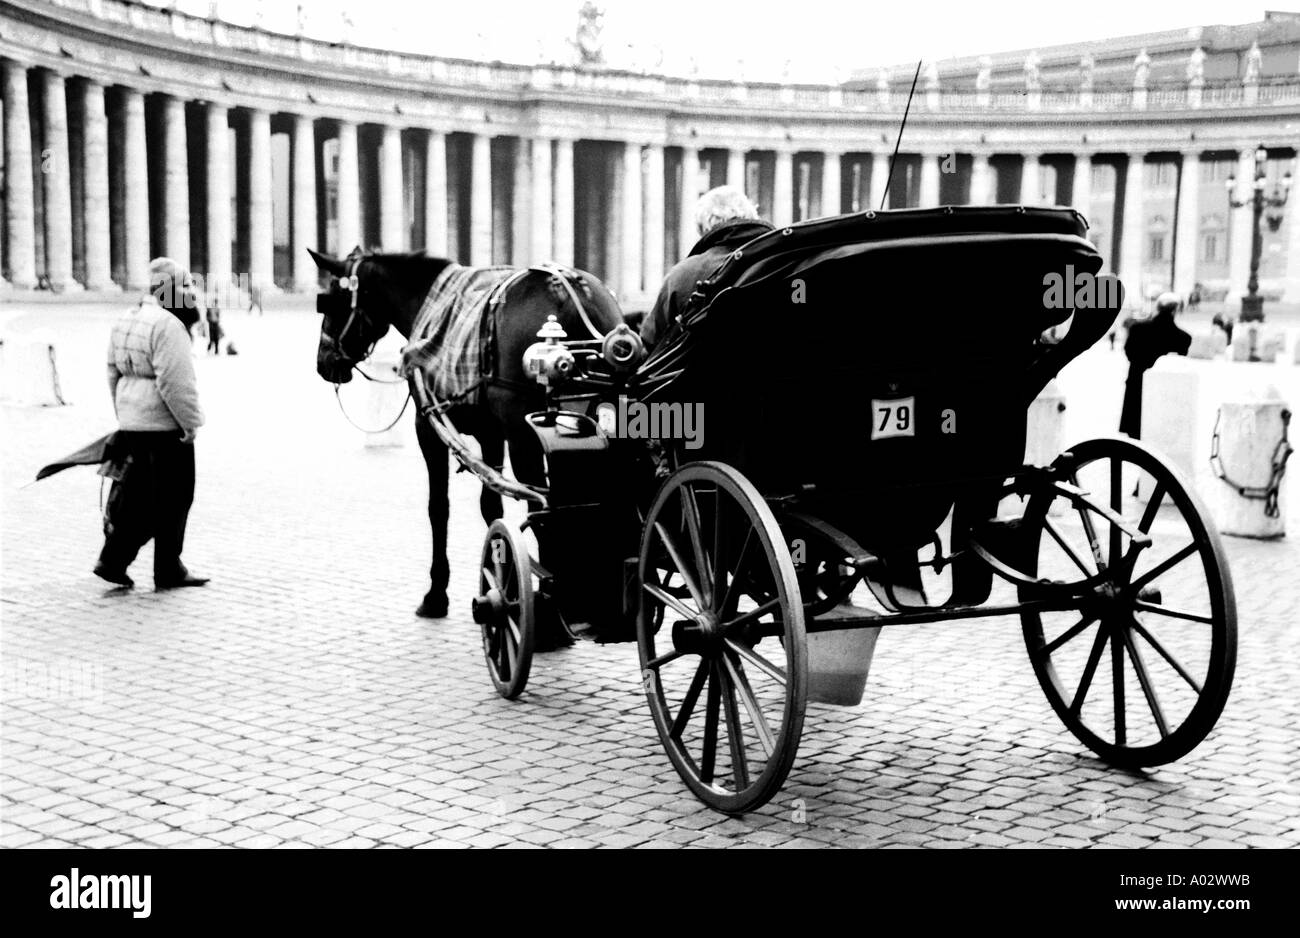 Horse drawn carriage in Saint Peter's Square, Vatican City, Rome, Italy. Stock Photo